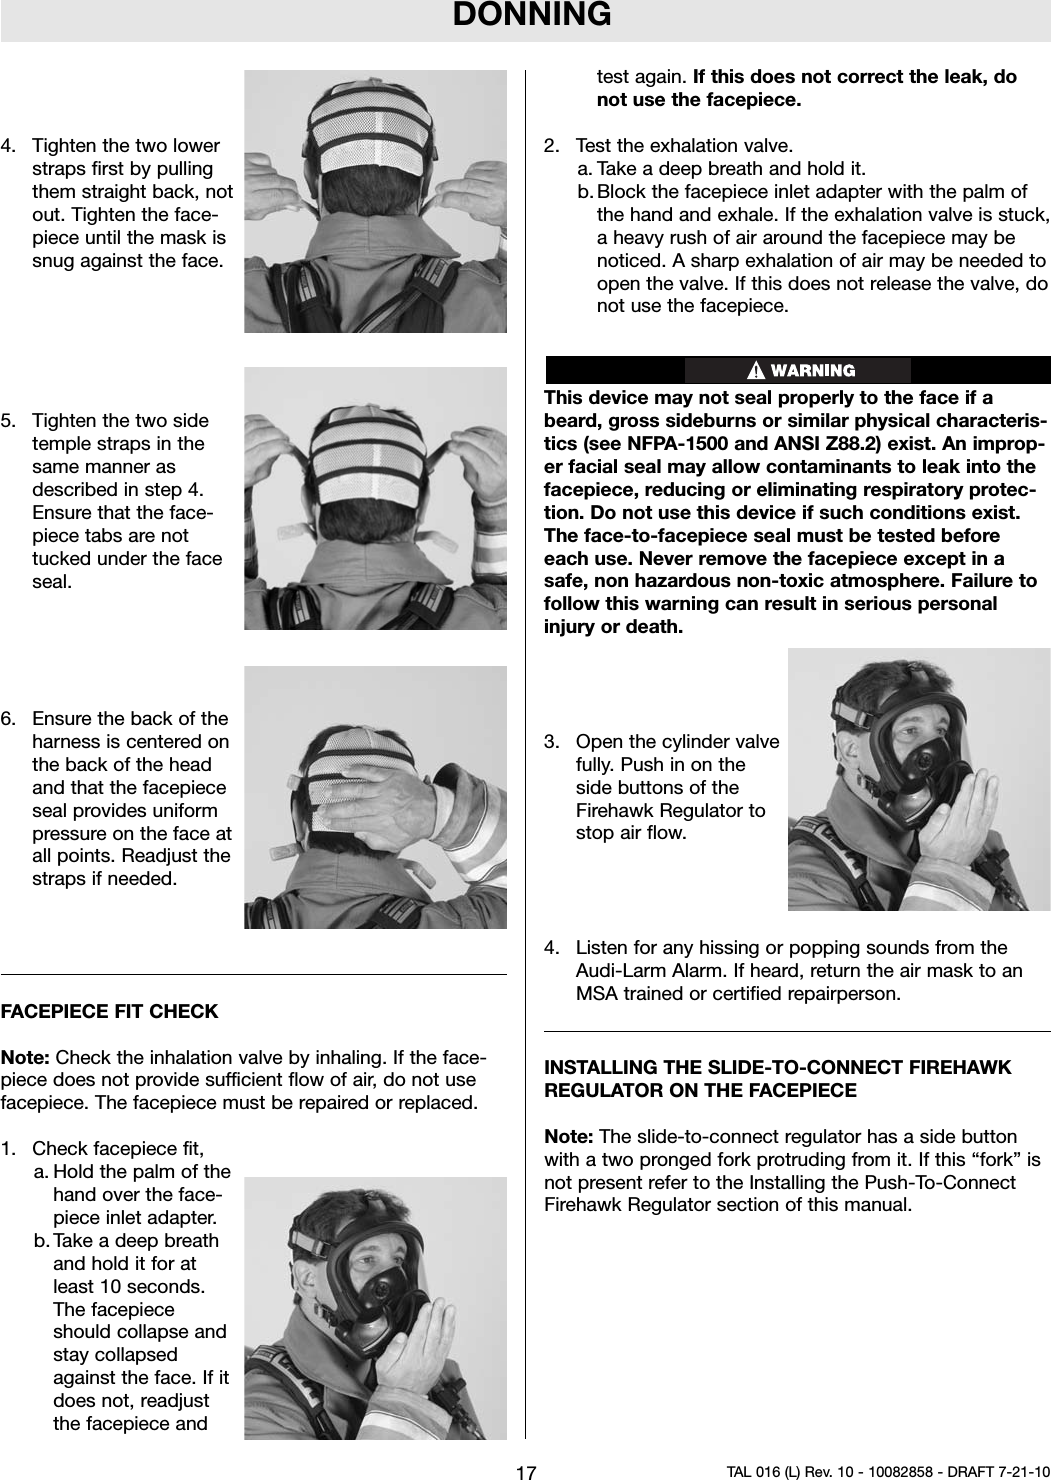 DONNING4. Tighten the two lowerstraps first by pullingthem straight back, notout. Tighten the face-piece until the mask issnug against the face.5. Tighten the two sidetemple straps in thesame manner asdescribed in step 4.Ensure that the face-piece tabs are nottucked under the faceseal.6. Ensure the back of theharness is centered onthe back of the headand that the facepieceseal provides uniformpressure on the face atall points. Readjust thestraps if needed.FACEPIECE FIT CHECKNote: Check the inhalation valve by inhaling. If the face-piece does not provide sufficient flow of air, do not usefacepiece. The facepiece must be repaired or replaced.1. Check facepiece fit,a. Hold the palm of thehand over the face-piece inlet adapter.b. Take a deep breathand hold it for atleast 10 seconds.The facepieceshould collapse andstay collapsedagainst the face. If itdoes not, readjustthe facepiece andtest again. If this does not correct the leak, donot use the facepiece.2. Test the exhalation valve.a. Take a deep breath and hold it.b. Block the facepiece inlet adapter with the palm ofthe hand and exhale. If the exhalation valve is stuck,a heavy rush of air around the facepiece may benoticed. A sharp exhalation of air may be needed toopen the valve. If this does not release the valve, donot use the facepiece.This device may not seal properly to the face if abeard, gross sideburns or similar physical characteris-tics (see NFPA-1500 and ANSI Z88.2) exist. An improp-er facial seal may allow contaminants to leak into thefacepiece, reducing or eliminating respiratory protec-tion. Do not use this device if such conditions exist.The face-to-facepiece seal must be tested beforeeach use. Never remove the facepiece except in asafe, non hazardous non-toxic atmosphere. Failure tofollow this warning can result in serious personalinjury or death.3. Open the cylinder valvefully. Push in on theside buttons of theFirehawk Regulator tostop air flow.4. Listen for any hissing or popping sounds from theAudi-Larm Alarm. If heard, return the air mask to anMSA trained or certified repairperson.INSTALLING THE SLIDE-TO-CONNECT FIREHAWKREGULATOR ON THE FACEPIECENote: The slide-to-connect regulator has a side buttonwith a two pronged fork protruding from it. If this “fork” isnot present refer to the Installing the Push-To-ConnectFirehawk Regulator section of this manual.17 TAL 016 (L) Rev. 10 - 10082858 - DRAFT 7-21-10